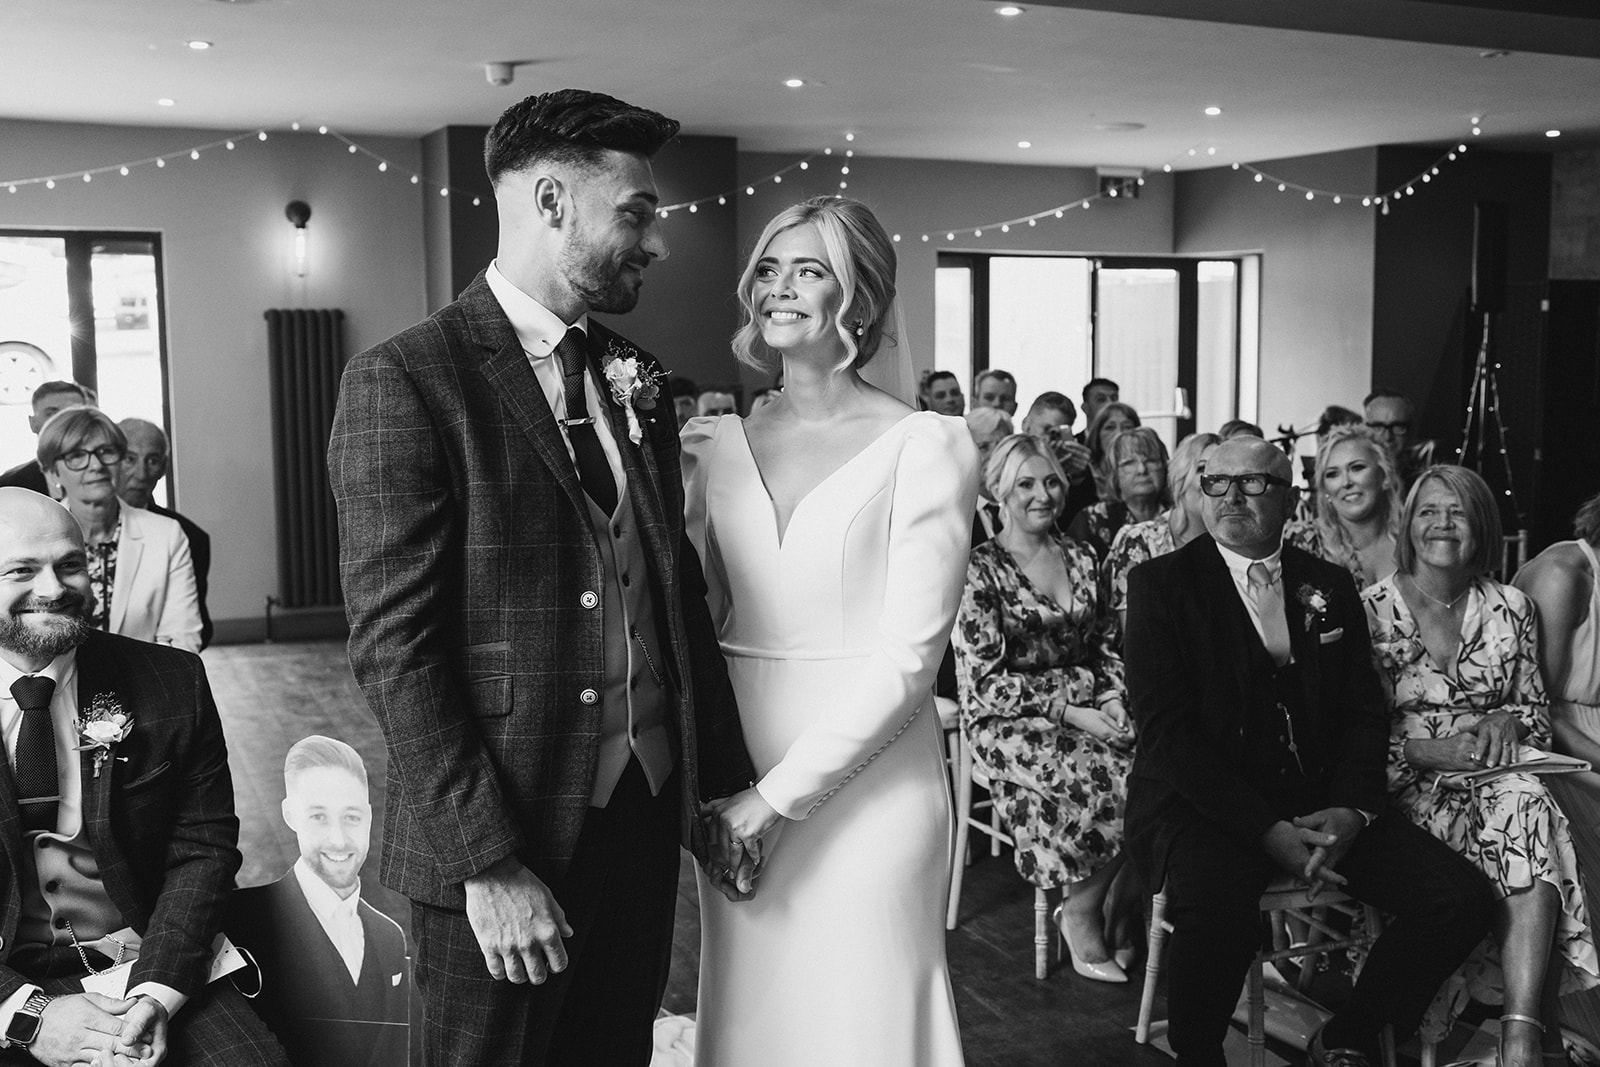 The Chequers Inn Wedding Photography - bride and groom, looking at each other lovingly during the wedding ceremony